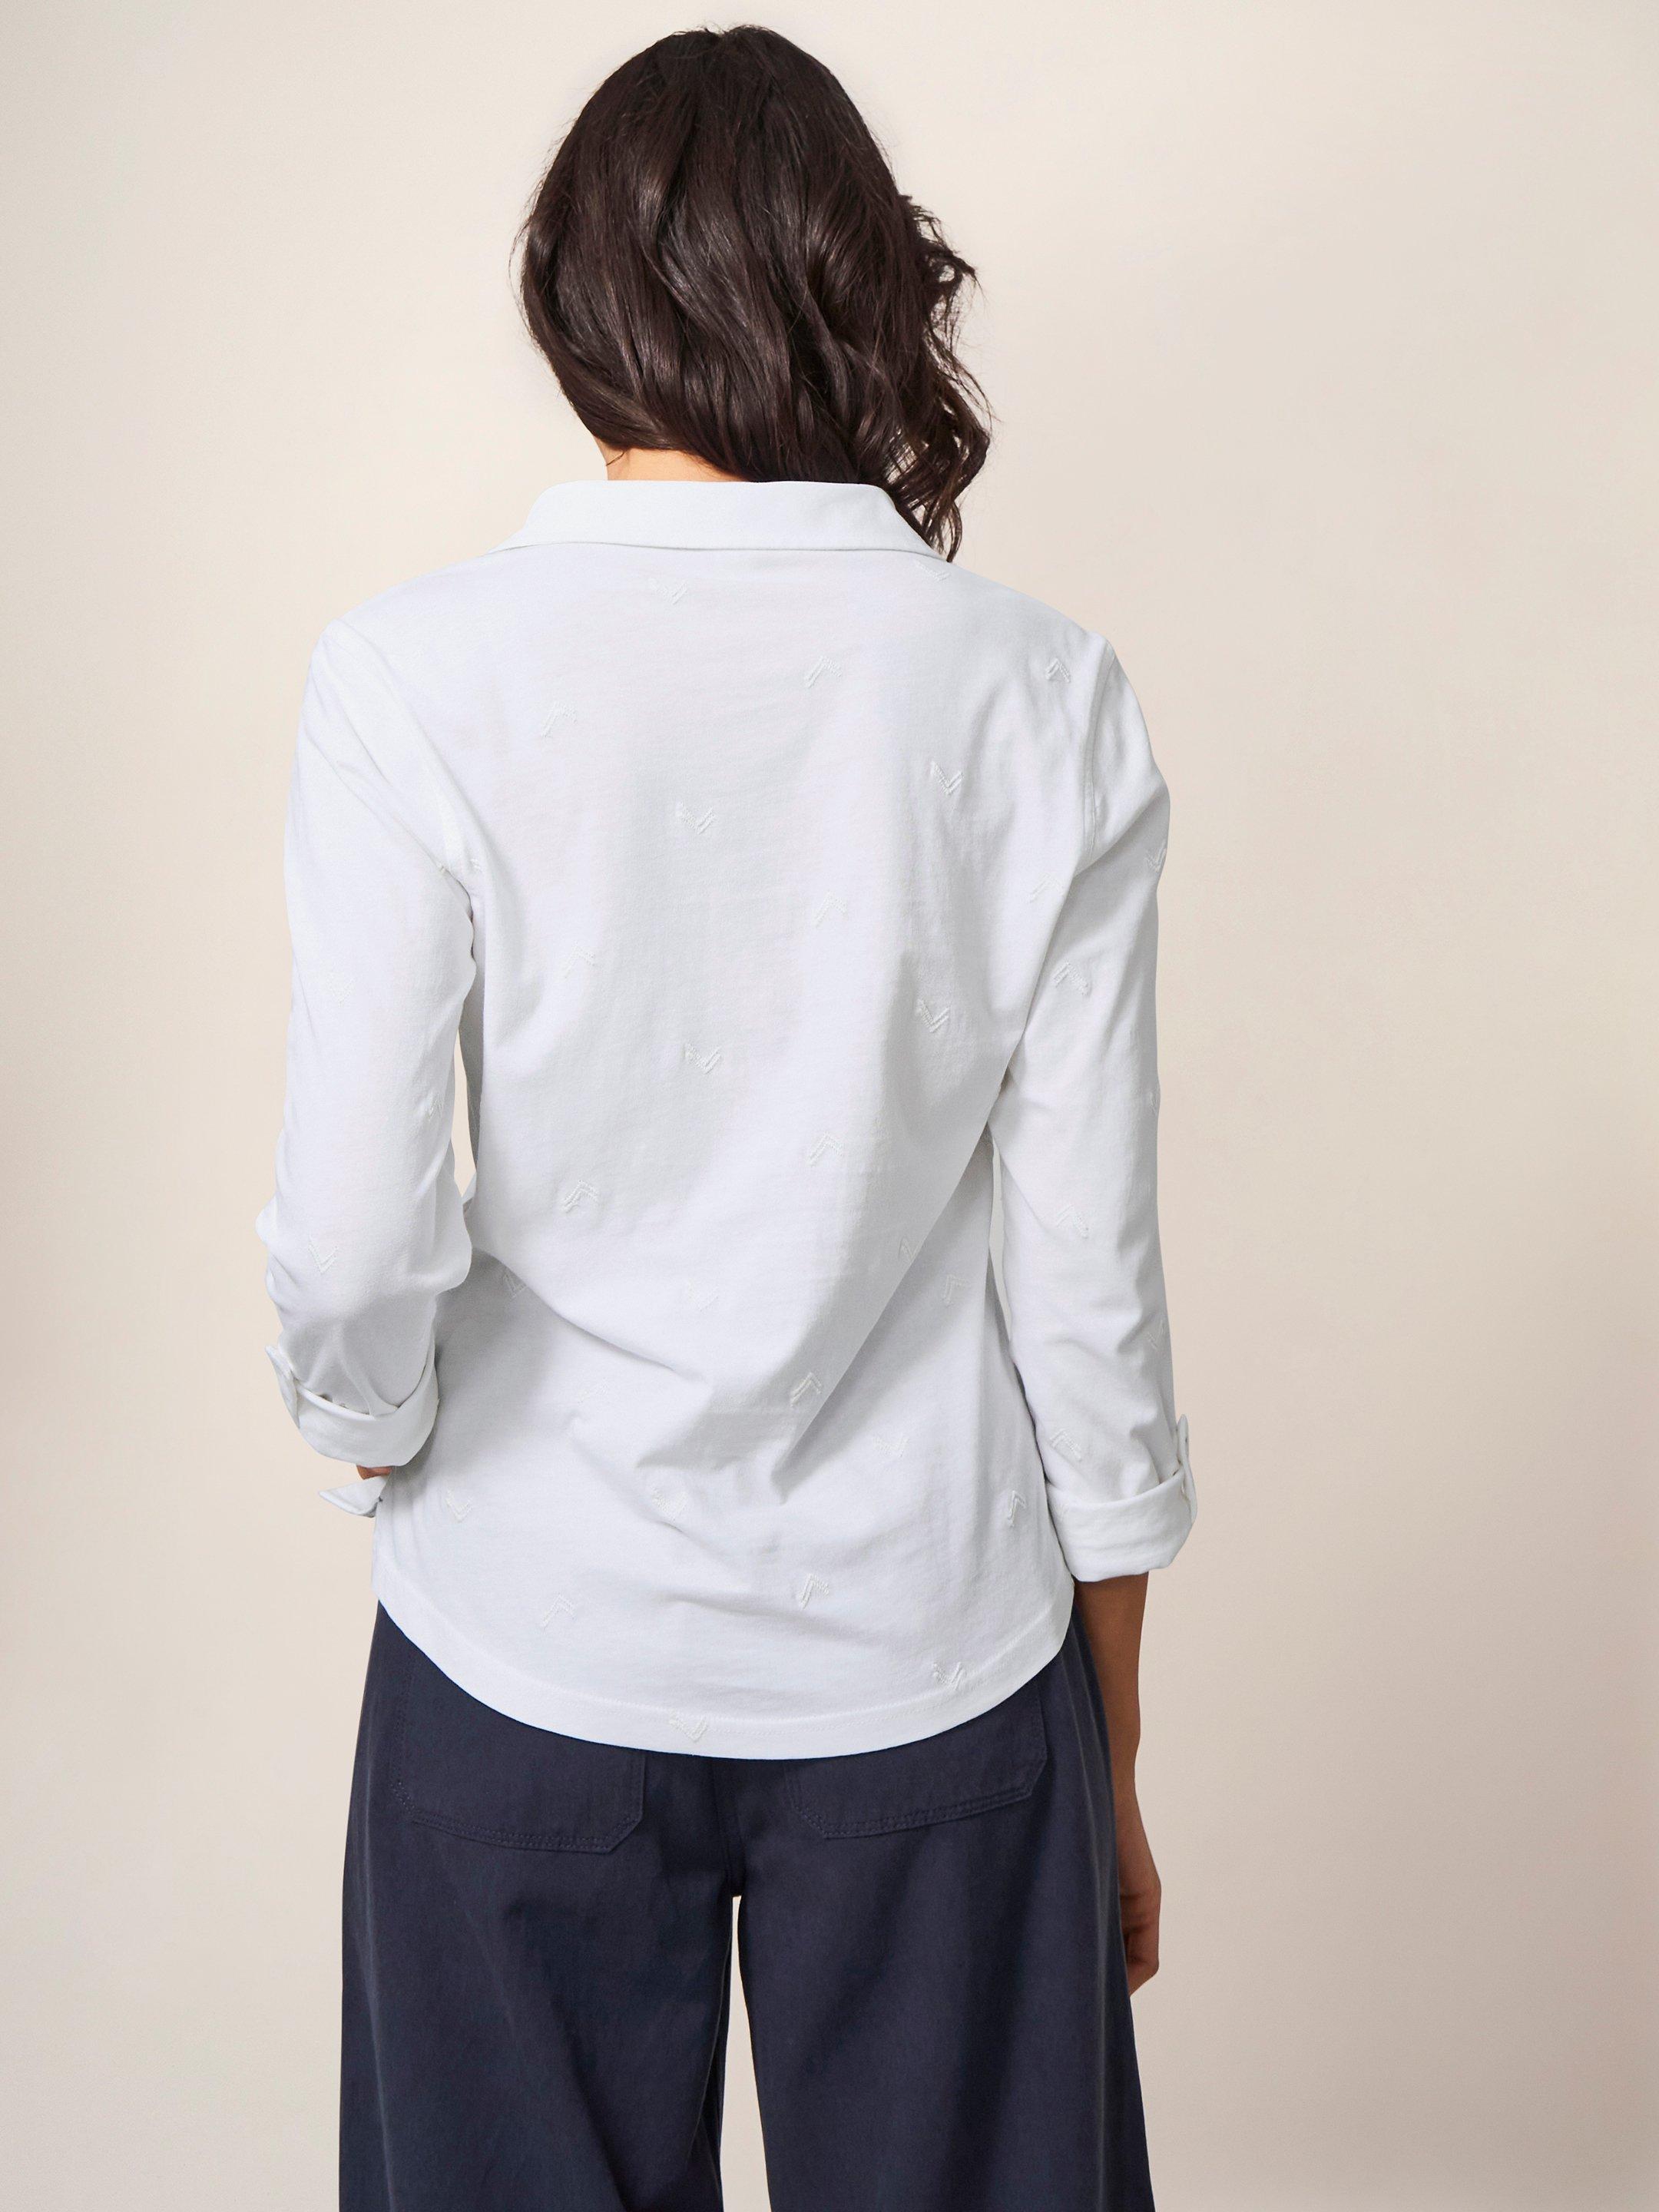 ANNIE EMBROIDERED JERSEY SHIRT in BRIL WHITE - MODEL BACK